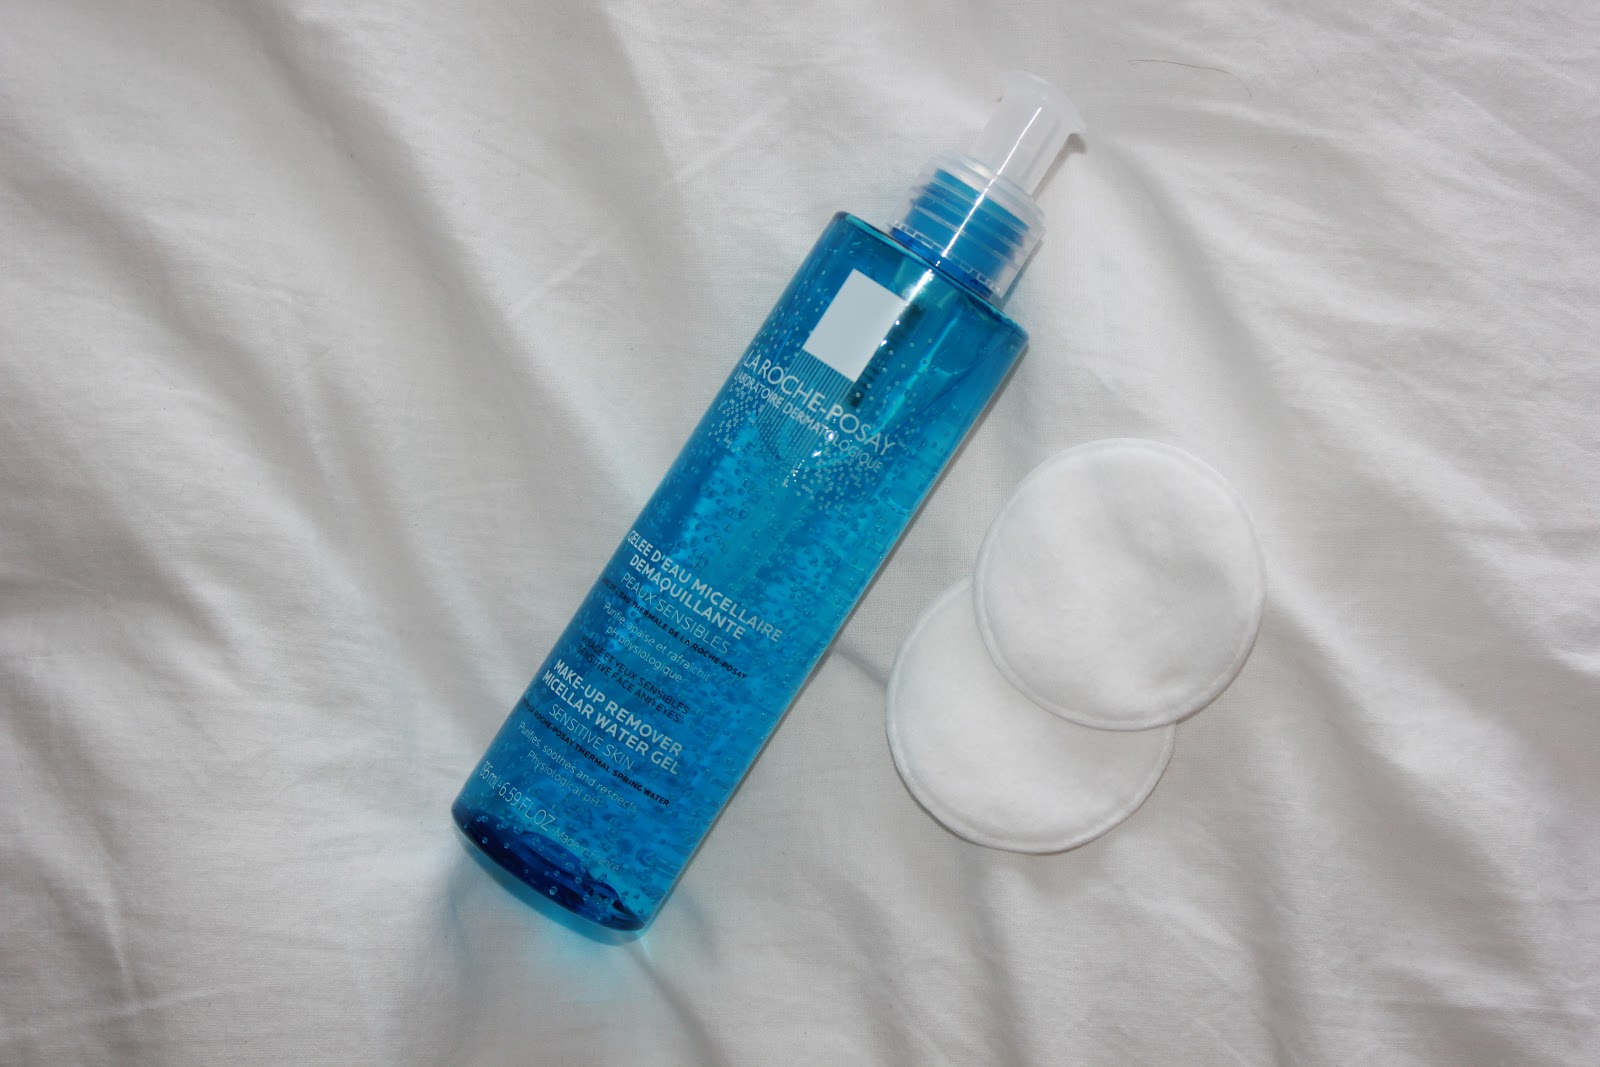 Brøl mest Uden Beauty She Wrote - Beauty Blog: La Roche Posay - Physiological Make-up Remover  Micellar Water Gel Review